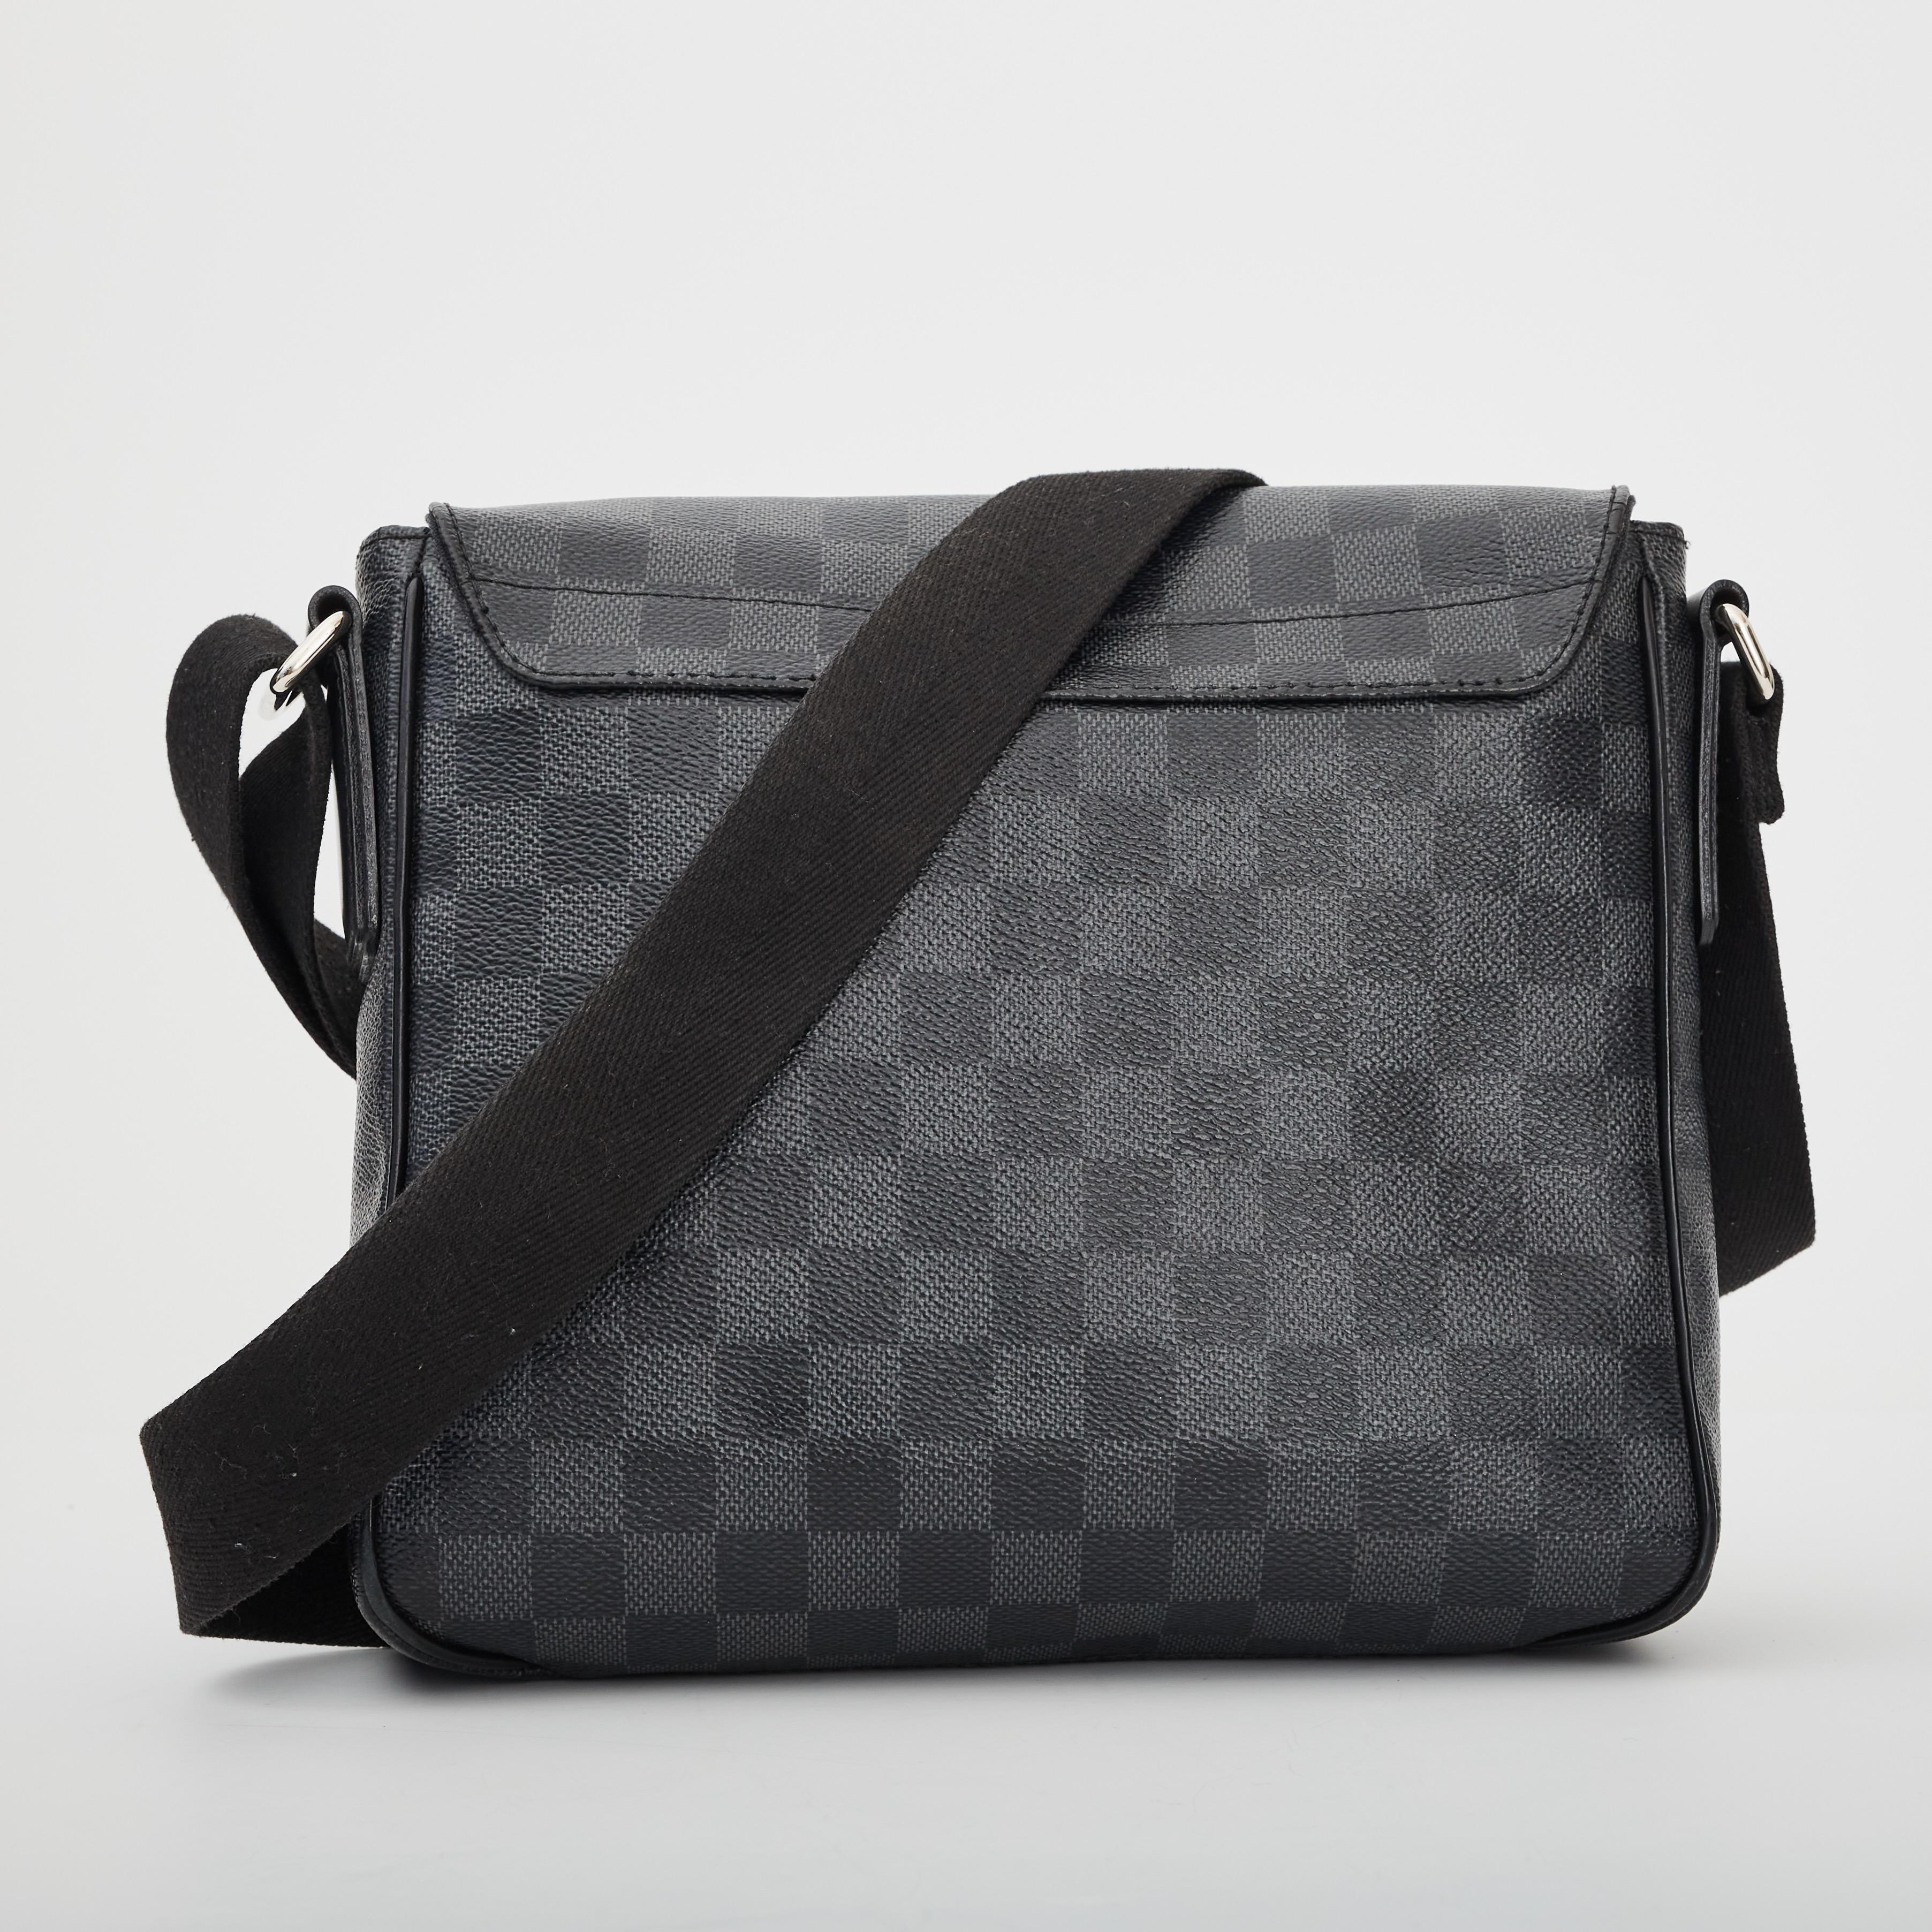 This messenger is made of graphite damier patterned canvas in graphite grey. The bag features a boxy rectangular shape with a large front flap with magnetic closure, black cowhide piping and an adjustable woven fabric cross-body strap. The flap